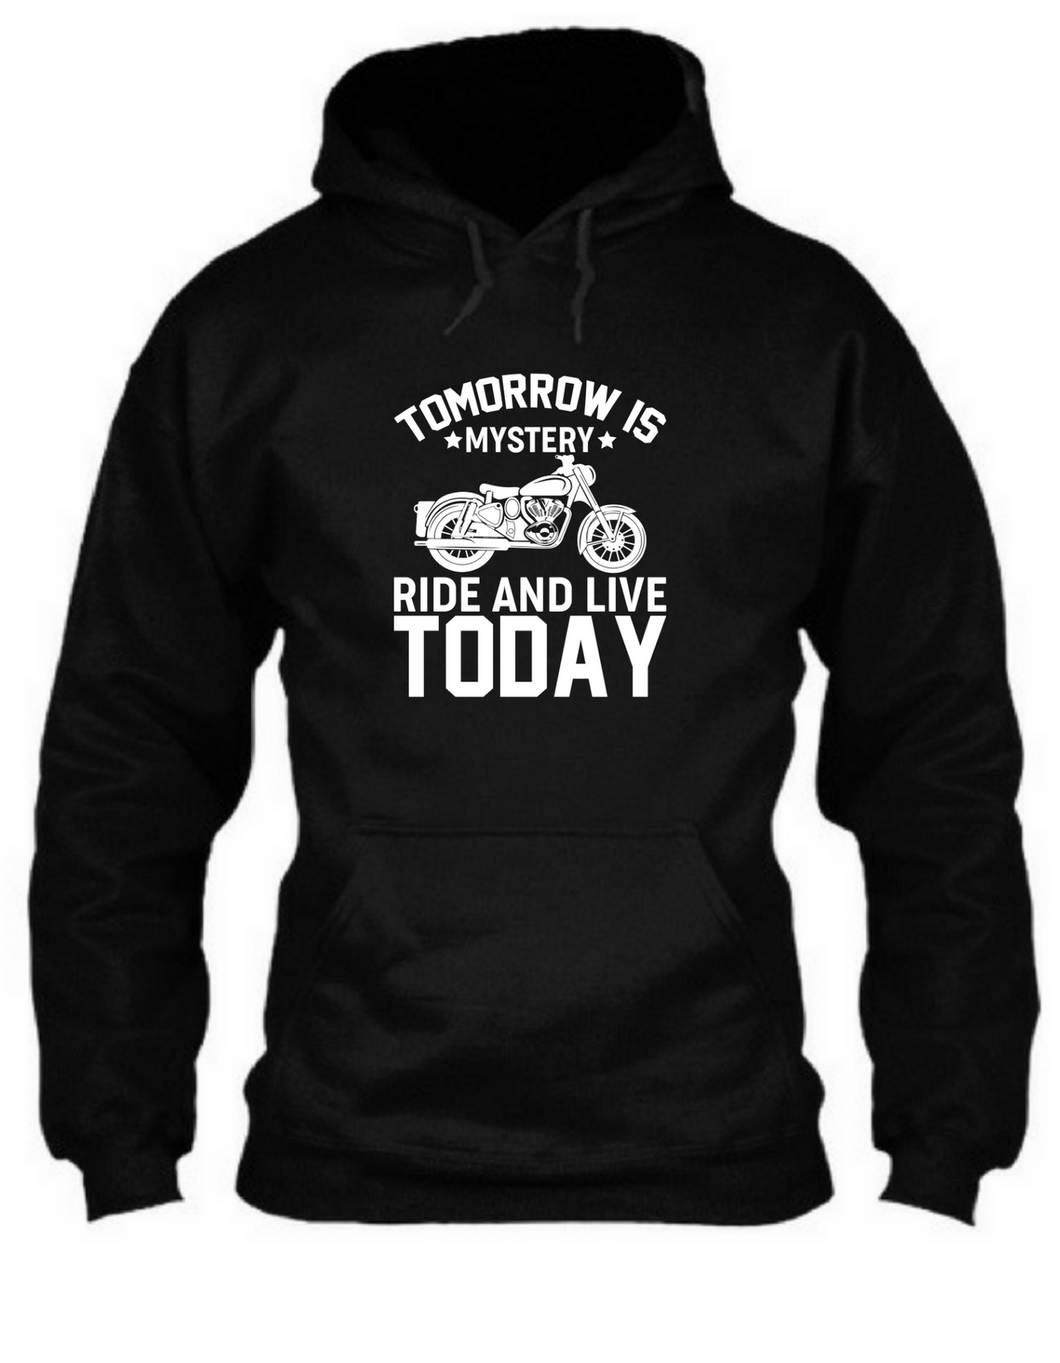 Tomorrow is mystery ride and live today - Unisex Hoodie